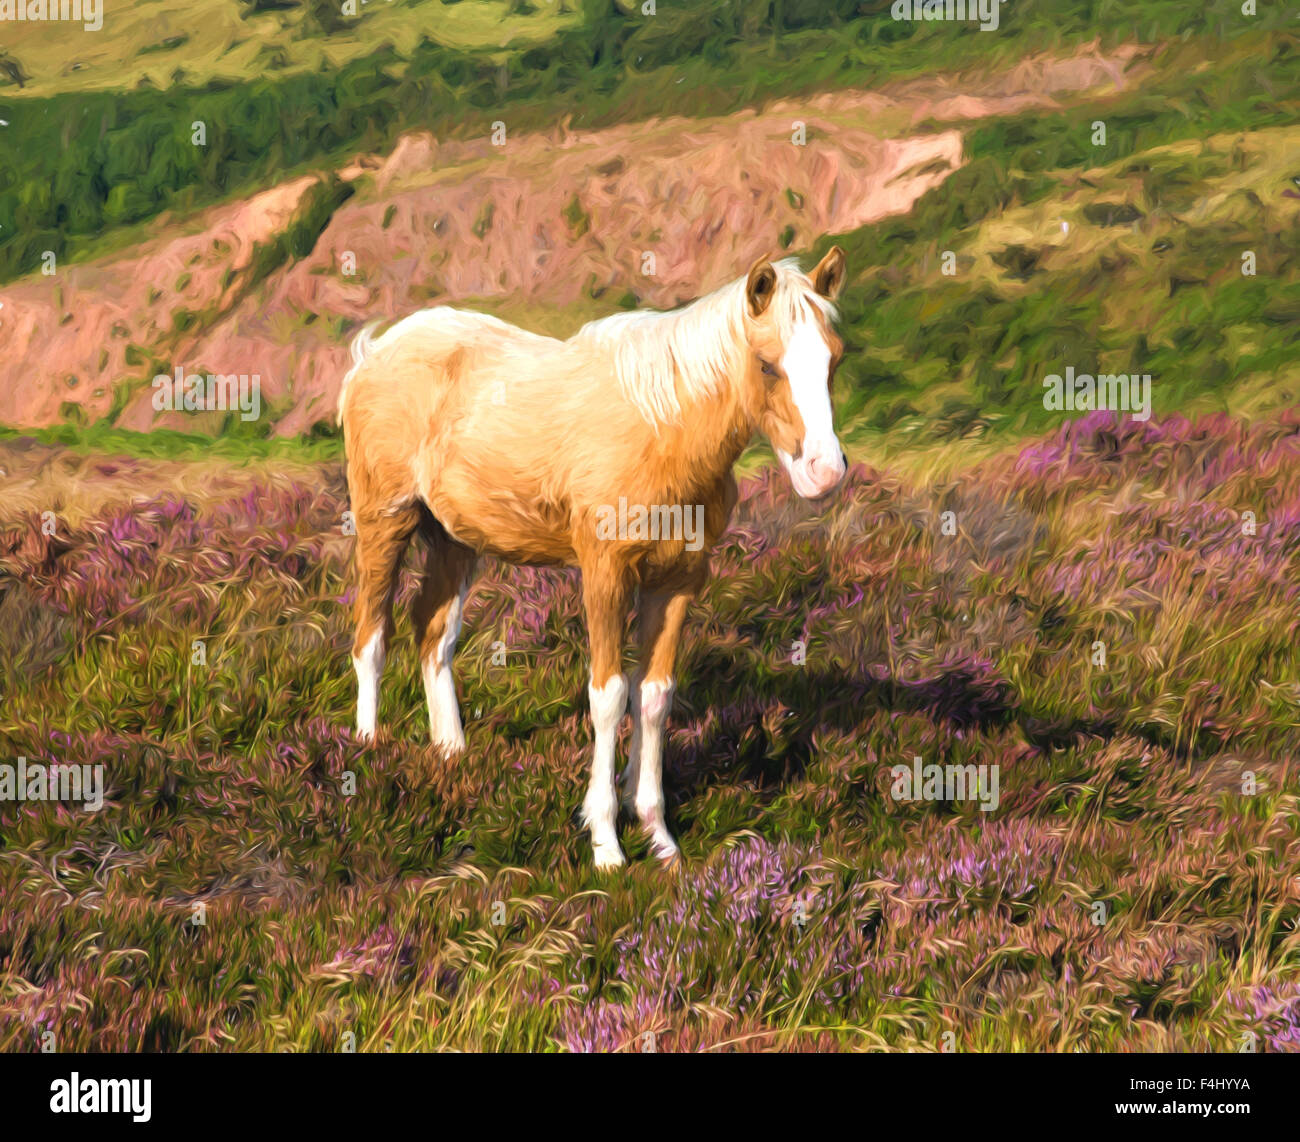 Dun cream pony with a white nose on an English hillside with purple heather illustration like oil painting Stock Photo